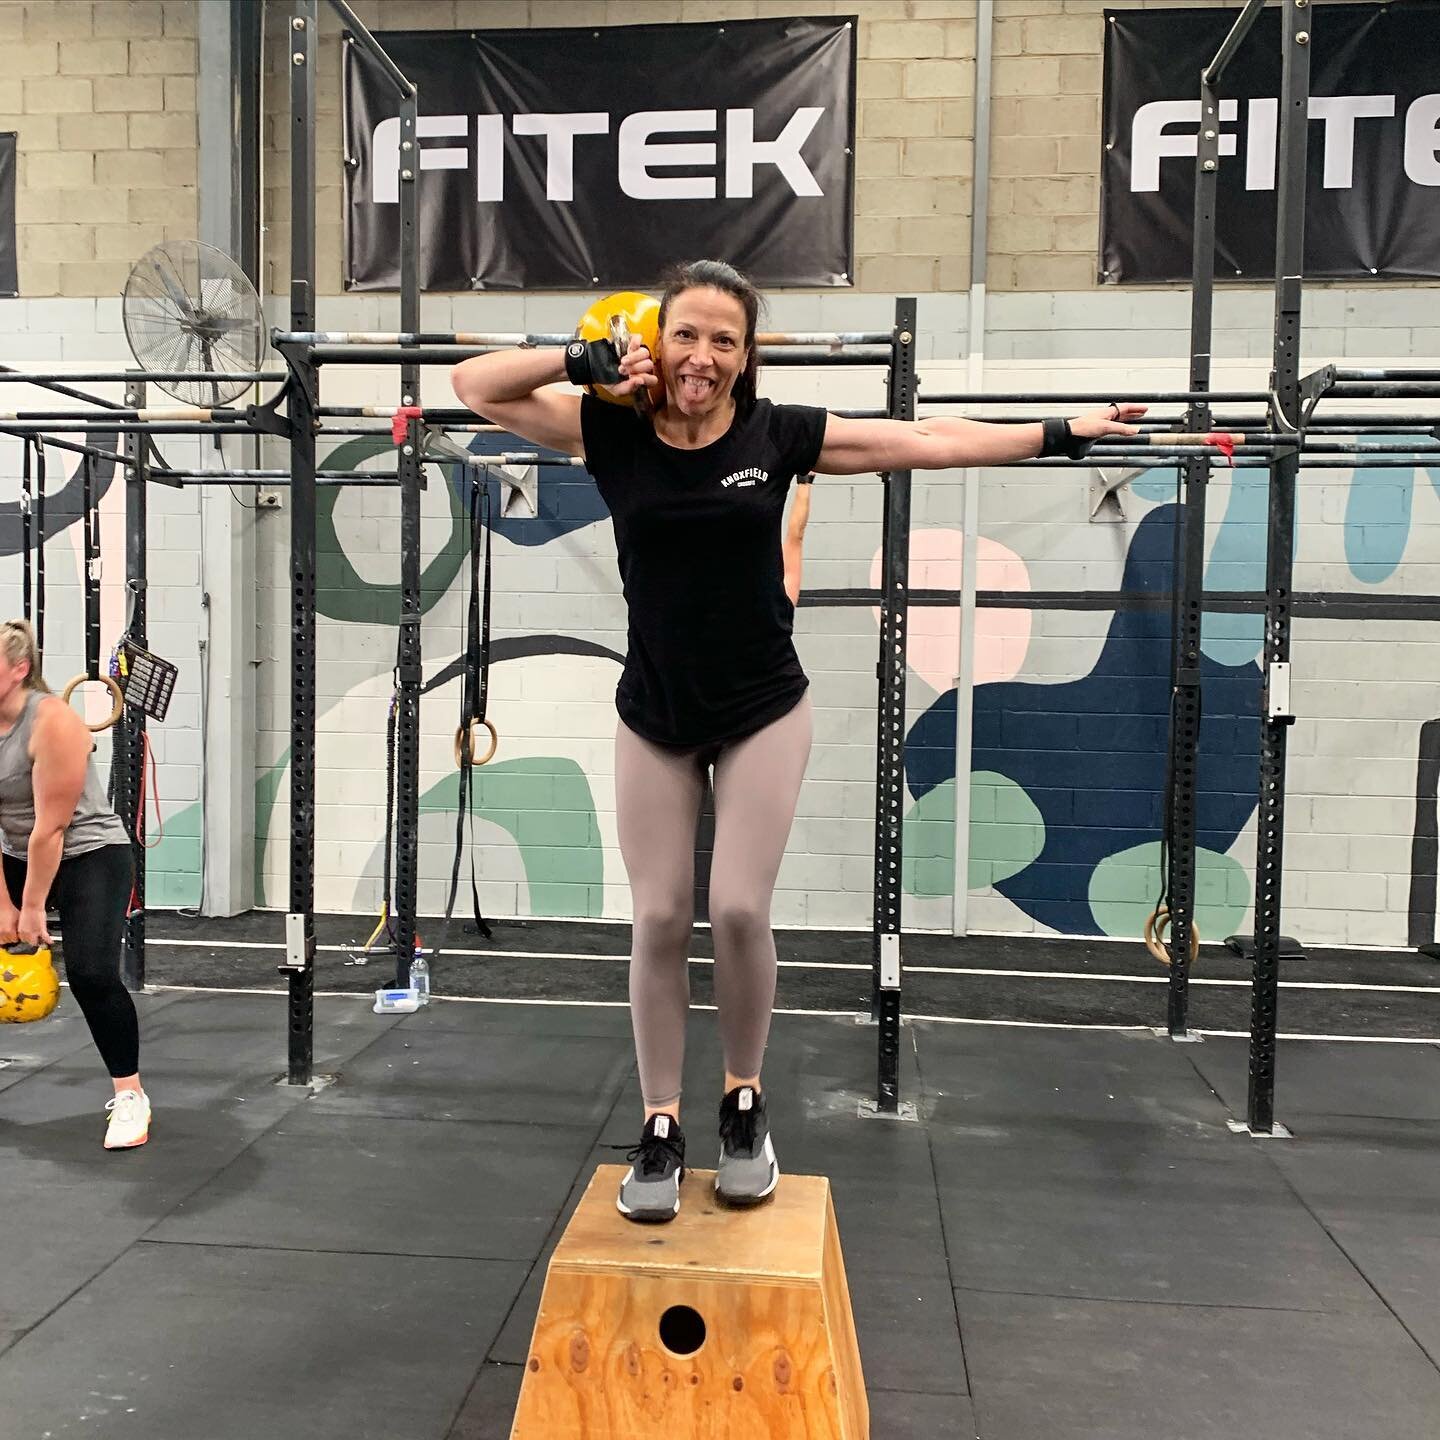 Try this WOD! 💙🤙

&lsquo;S-Club party&rsquo;
As many rounds as possible in 15 mins...
15 x Kettlebell swings 24/16kg
10 x Box step ups with 24/16kg KB
10 x Toes to bar

Interested in joining our community? Text CFK to 0401 562 086 to redeem a 14 da